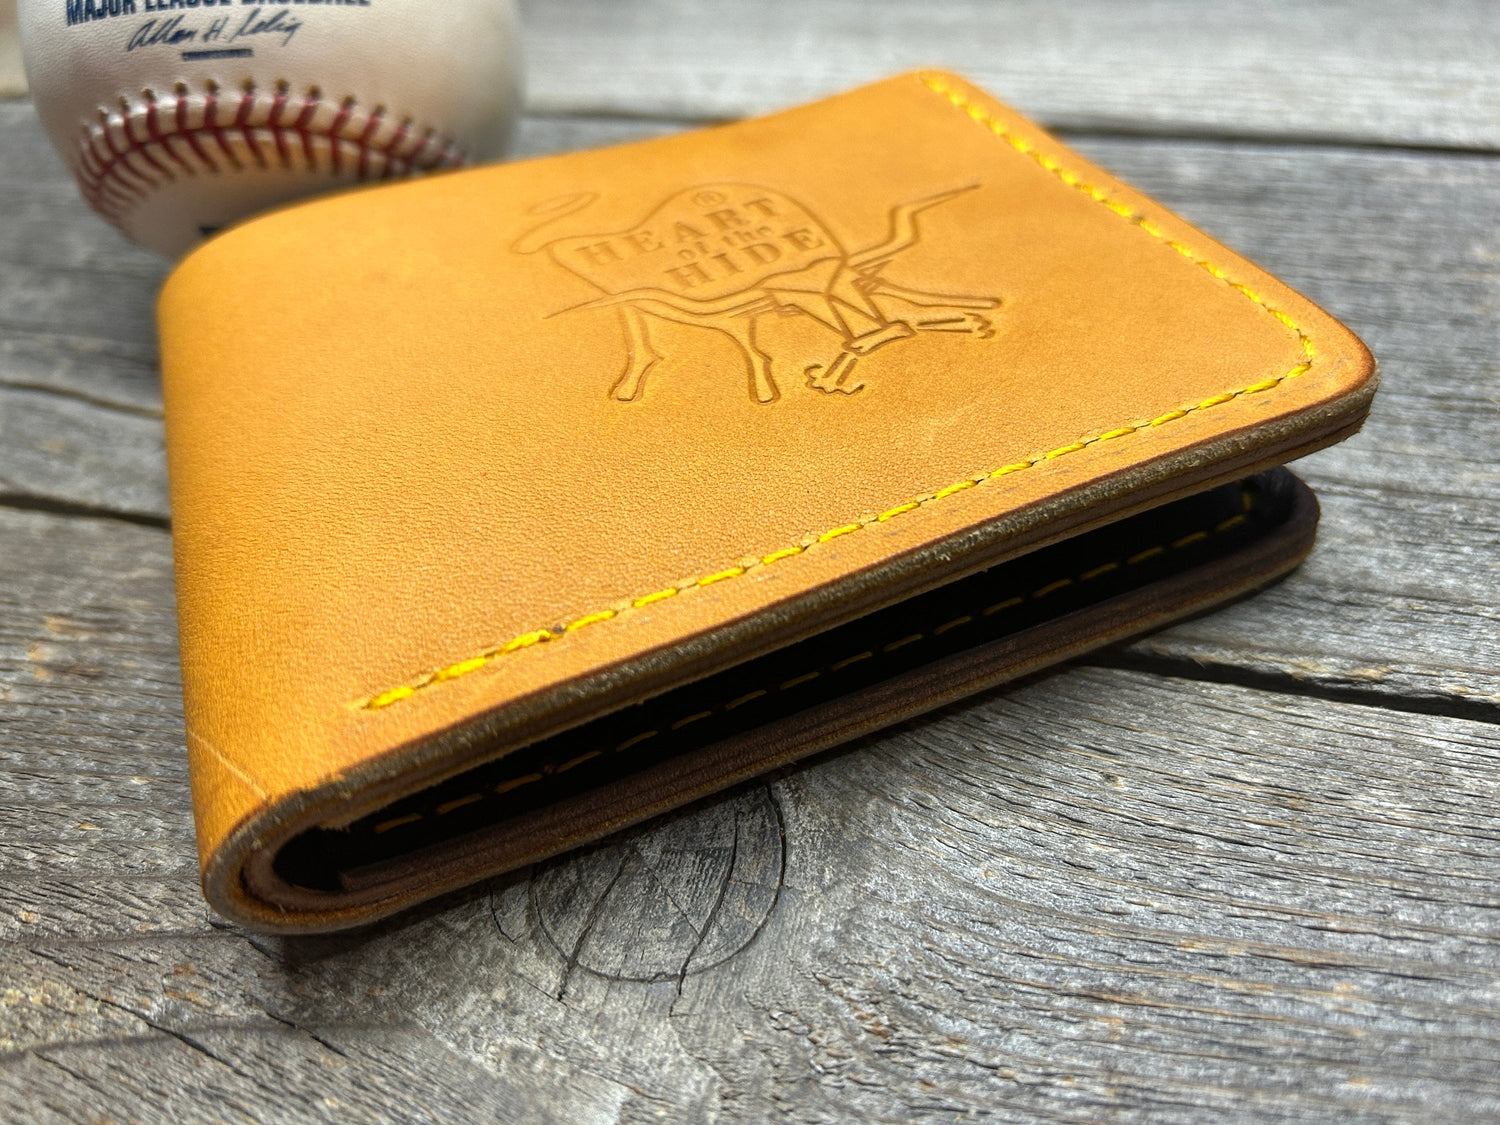 Rawlings Heart of the Hide Horween Bifold Baseball Glove Wallet!! BLEM - See Pics!